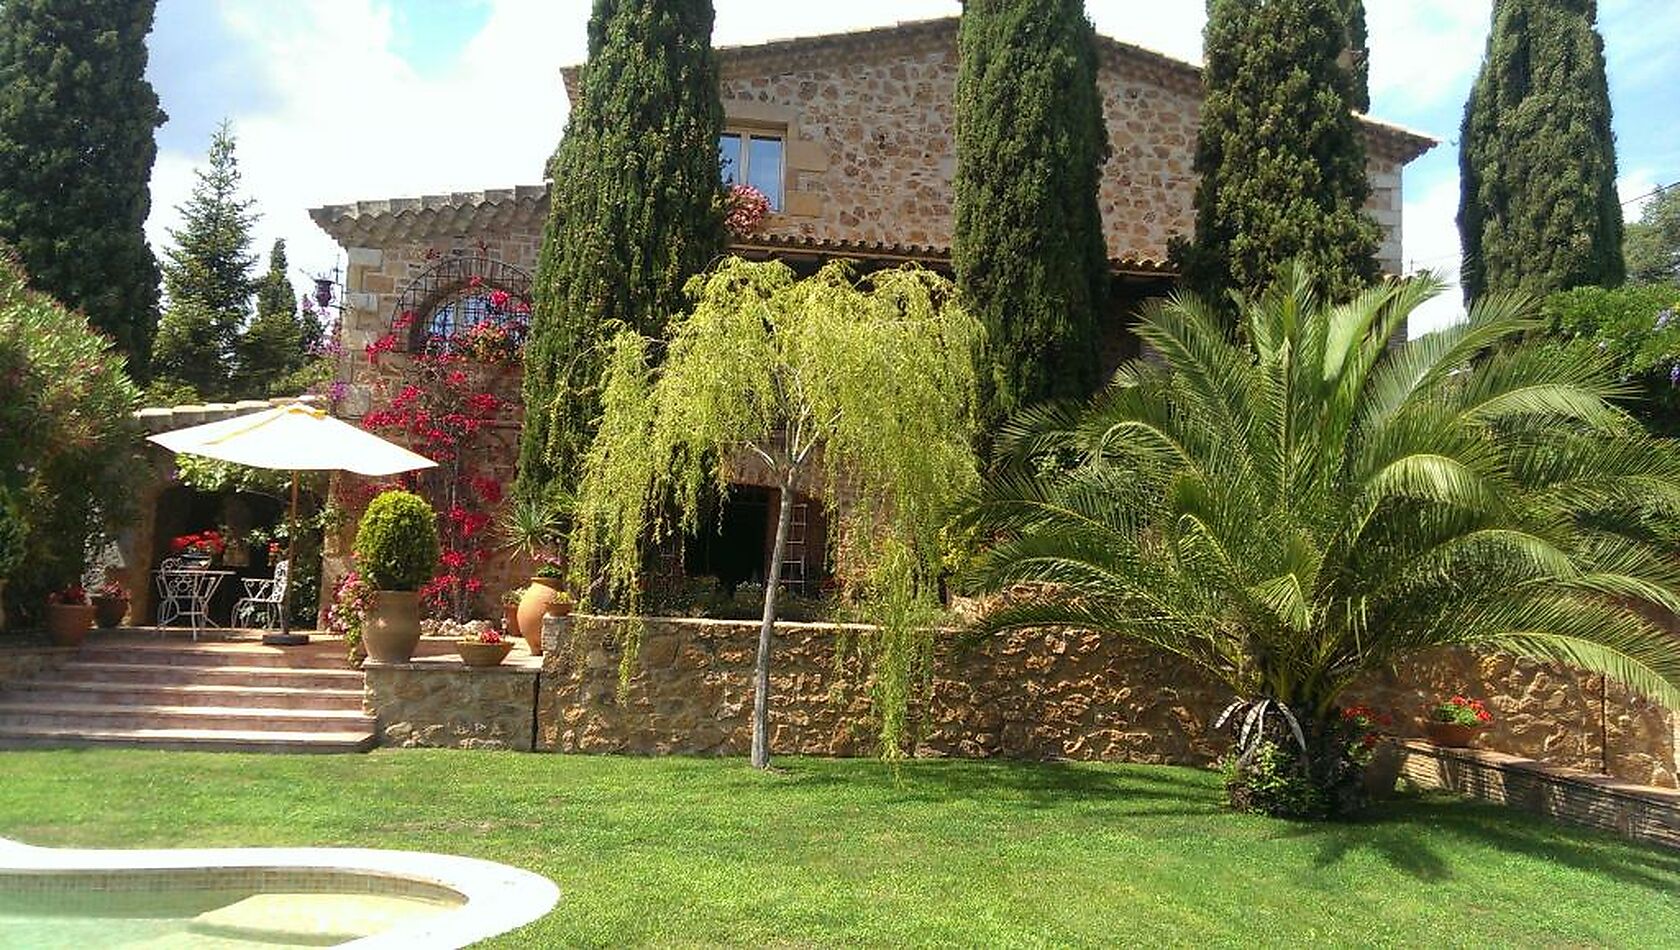 Masia-style property located in Playa de Aro, a short walk from the center and the beaches